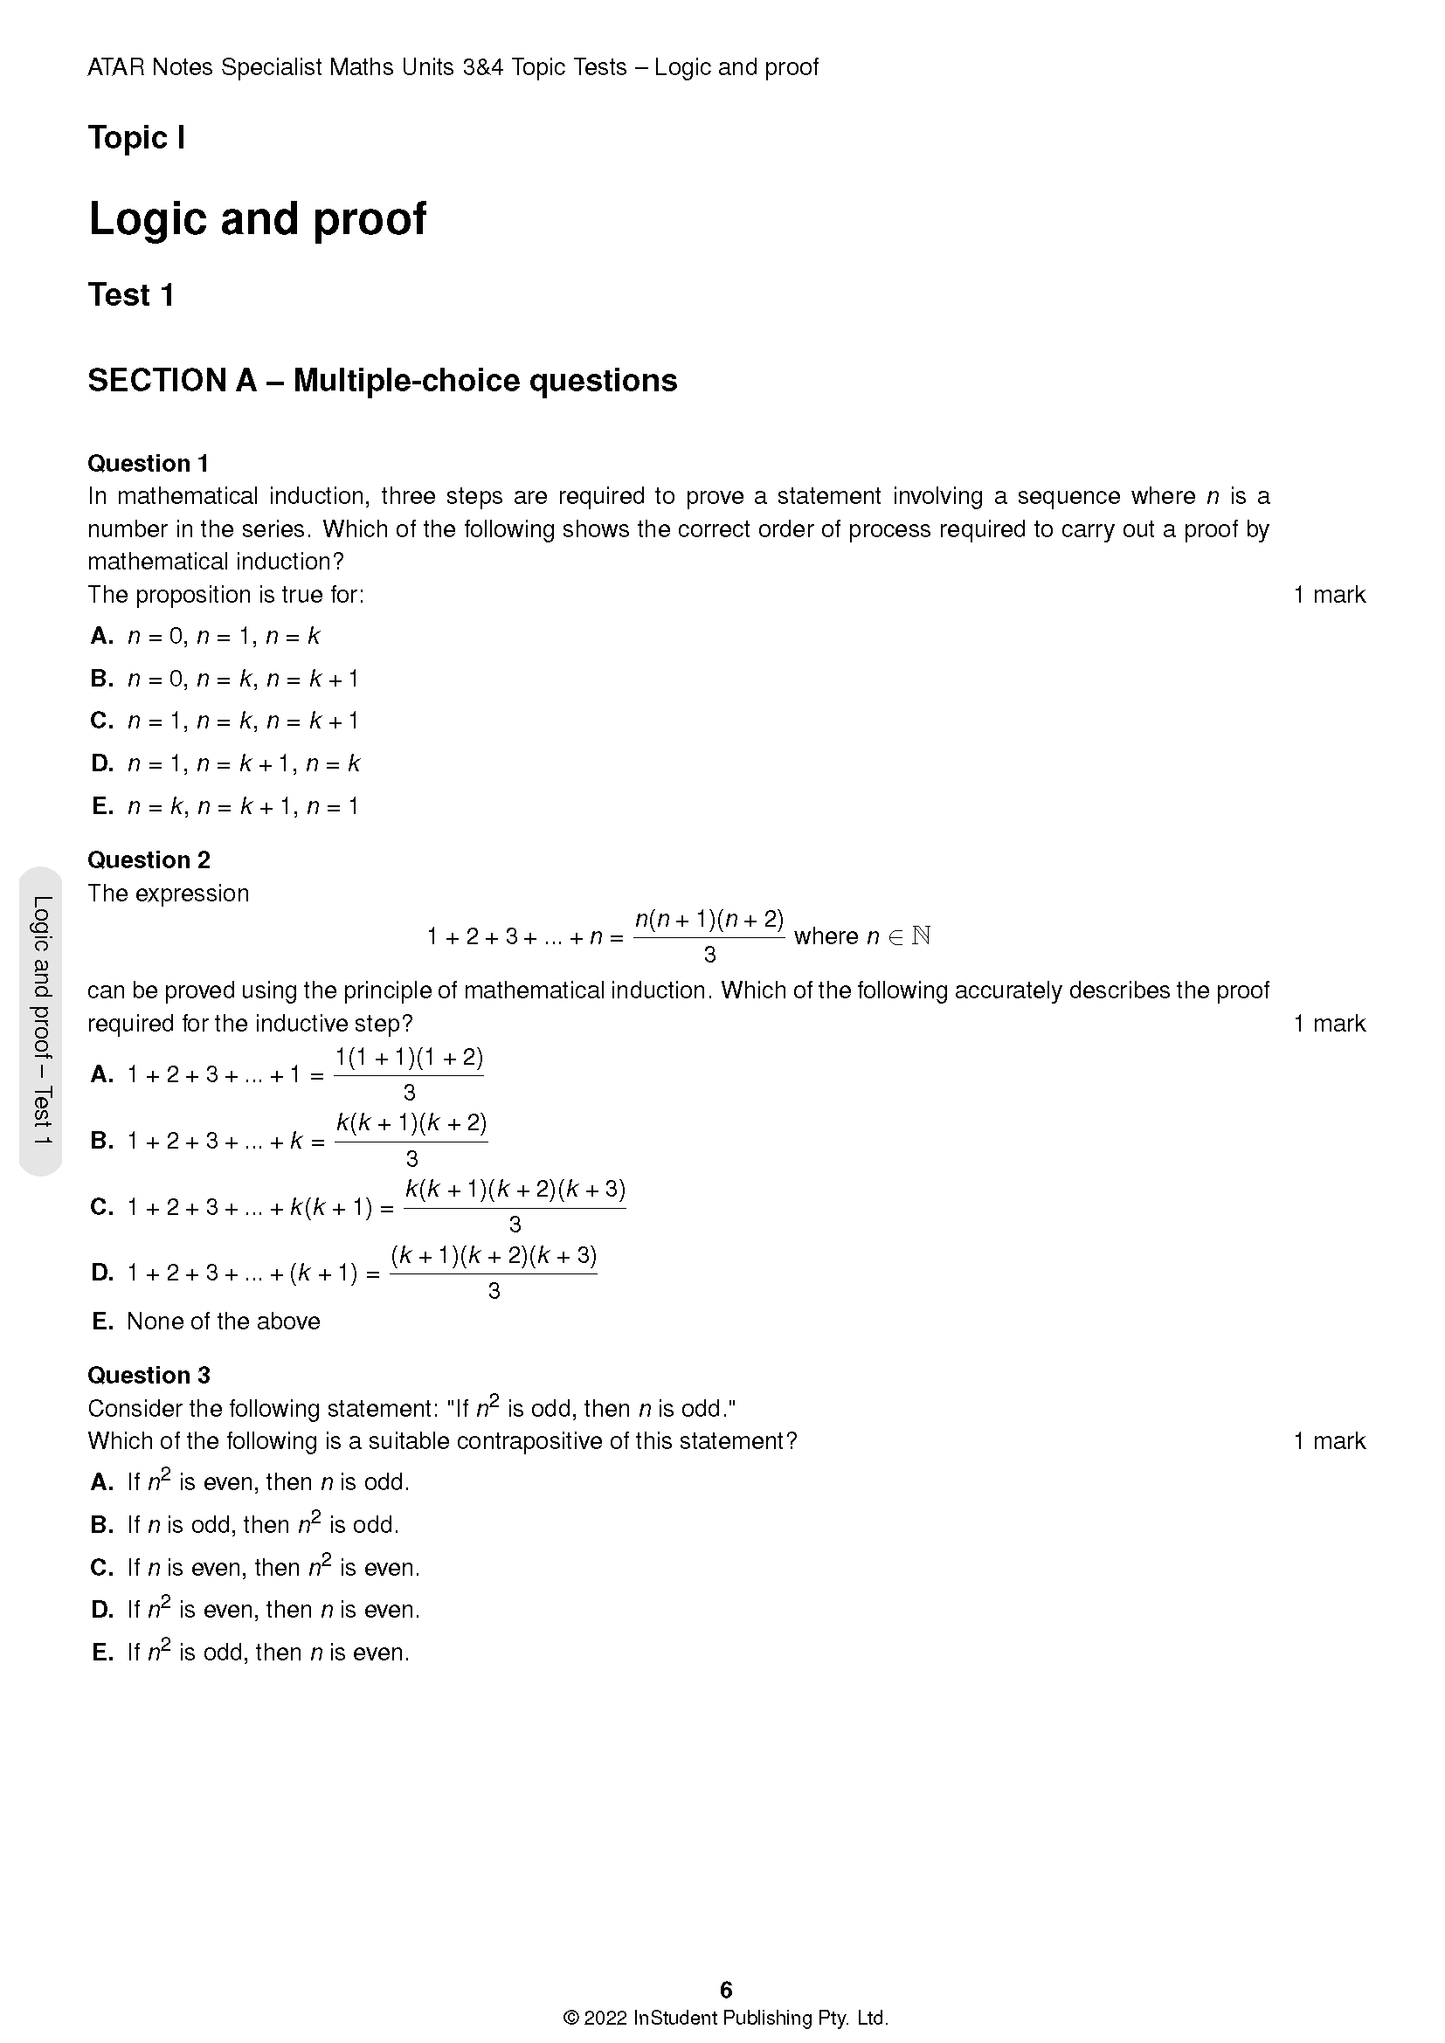 ATAR Notes VCE Specialist Maths 3&4 Topic Tests (2023-2024)